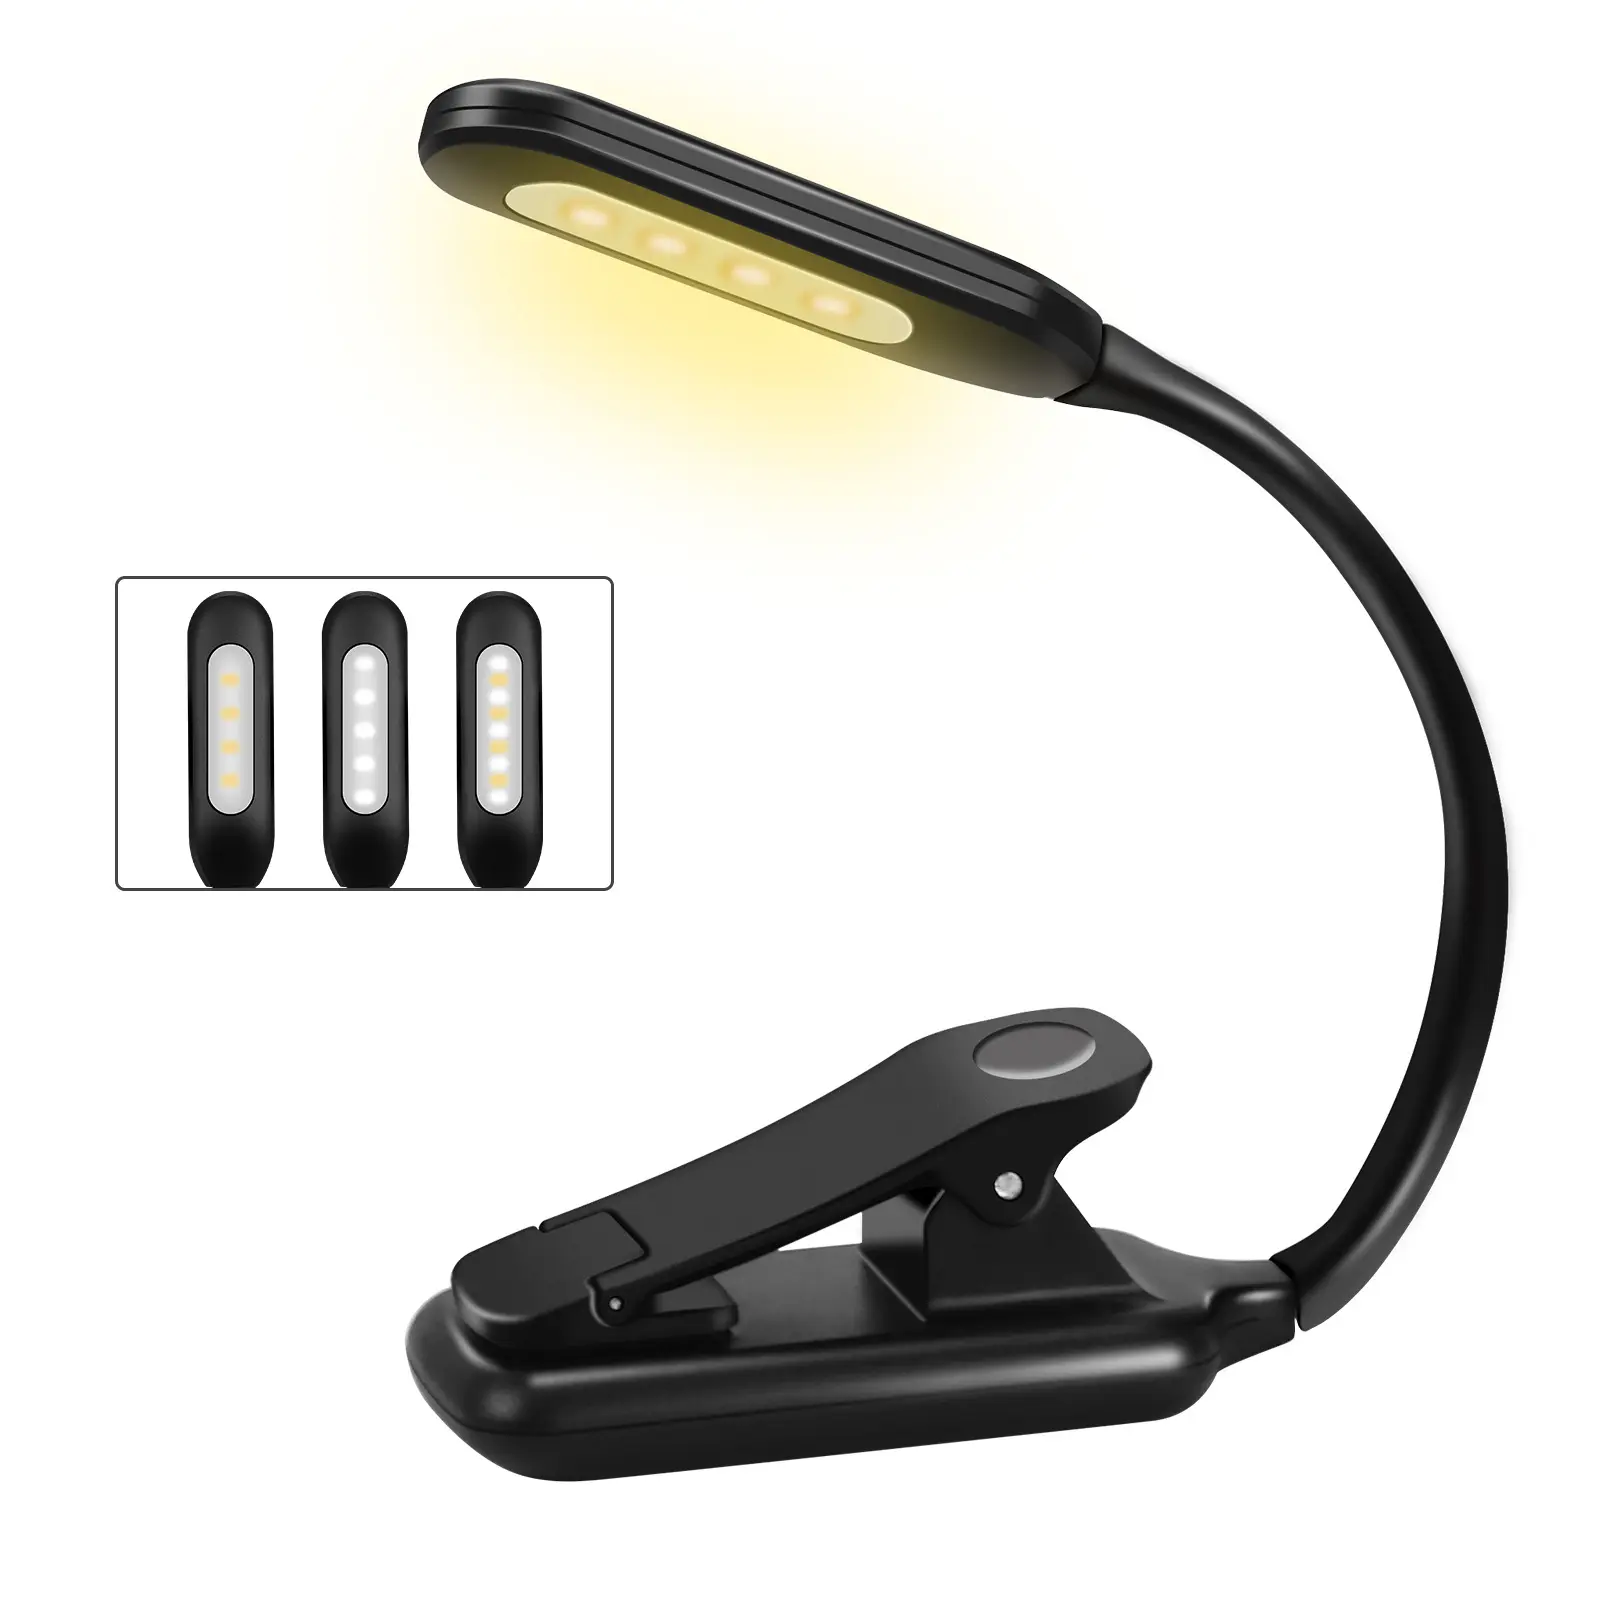 LED Book Light Clip Reading Light Flexible Study USB Rechargeable Book Light For Reading In Bed Adjustable Night Lamp